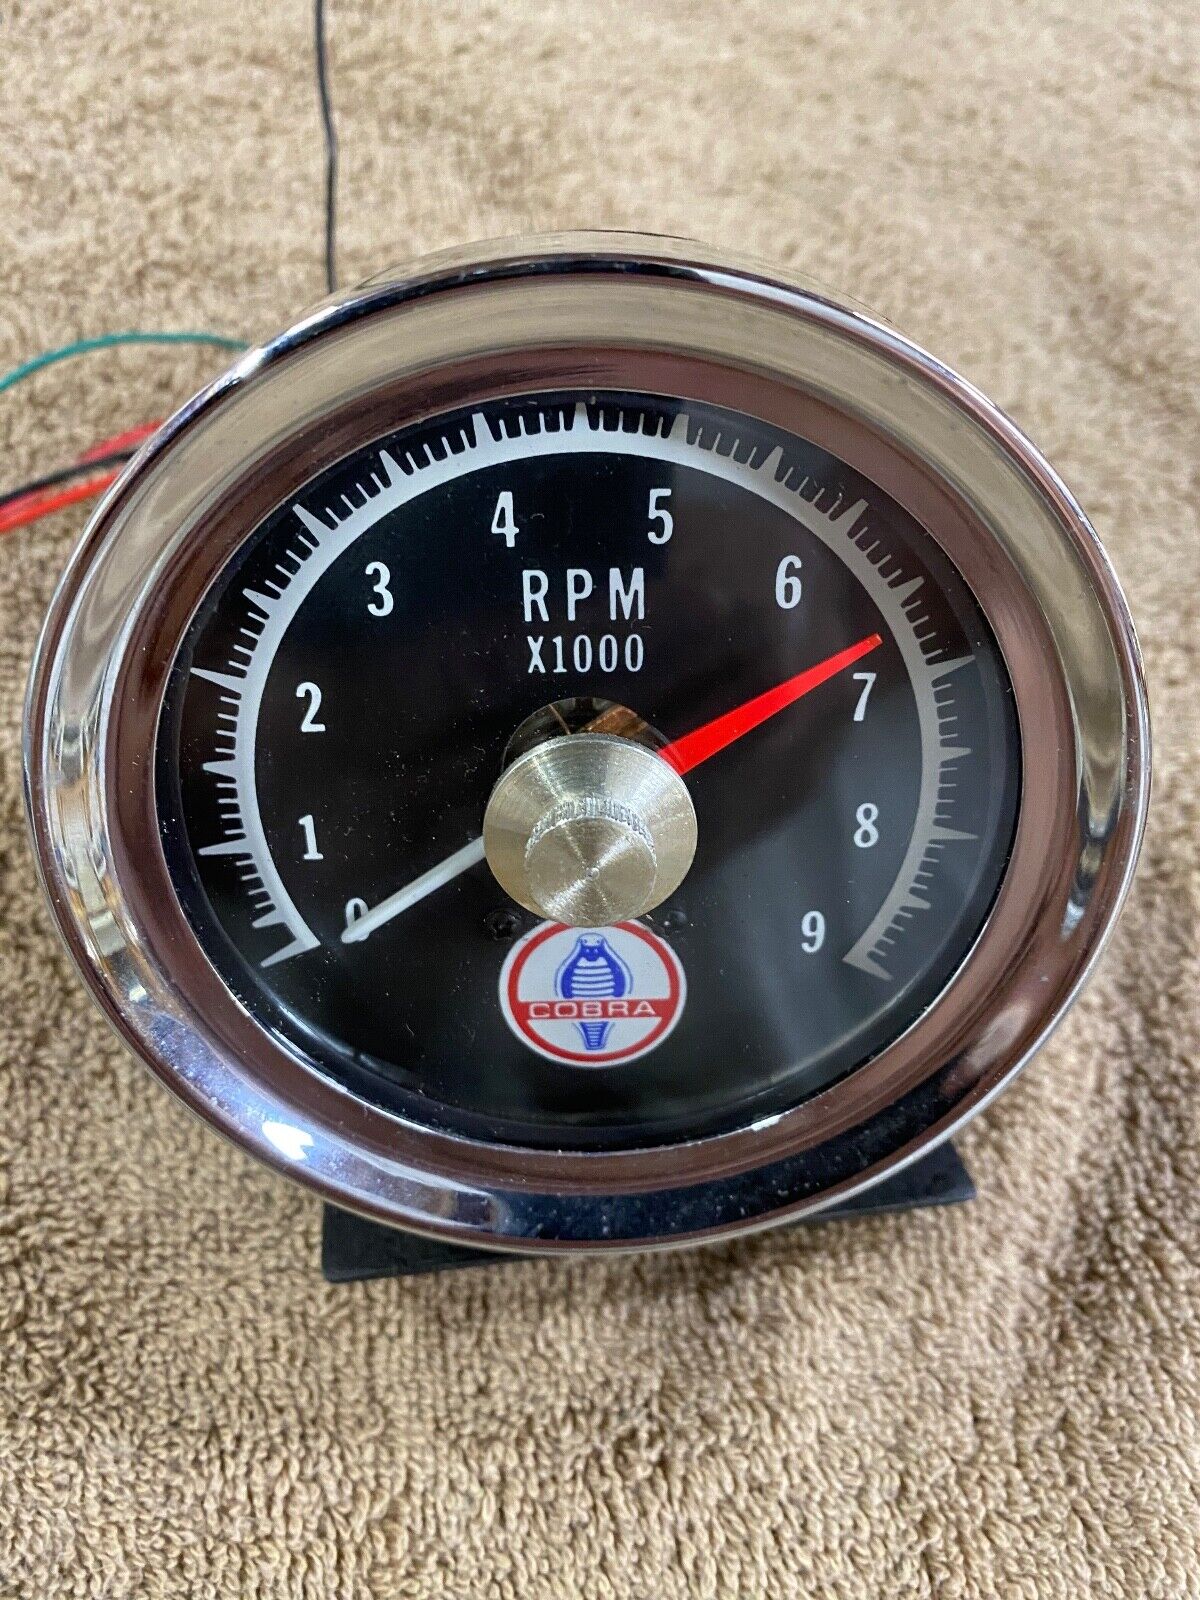 1966 Shelby Mustang 9K Tachometer GT 350 Hertz Mustang reproduction tested